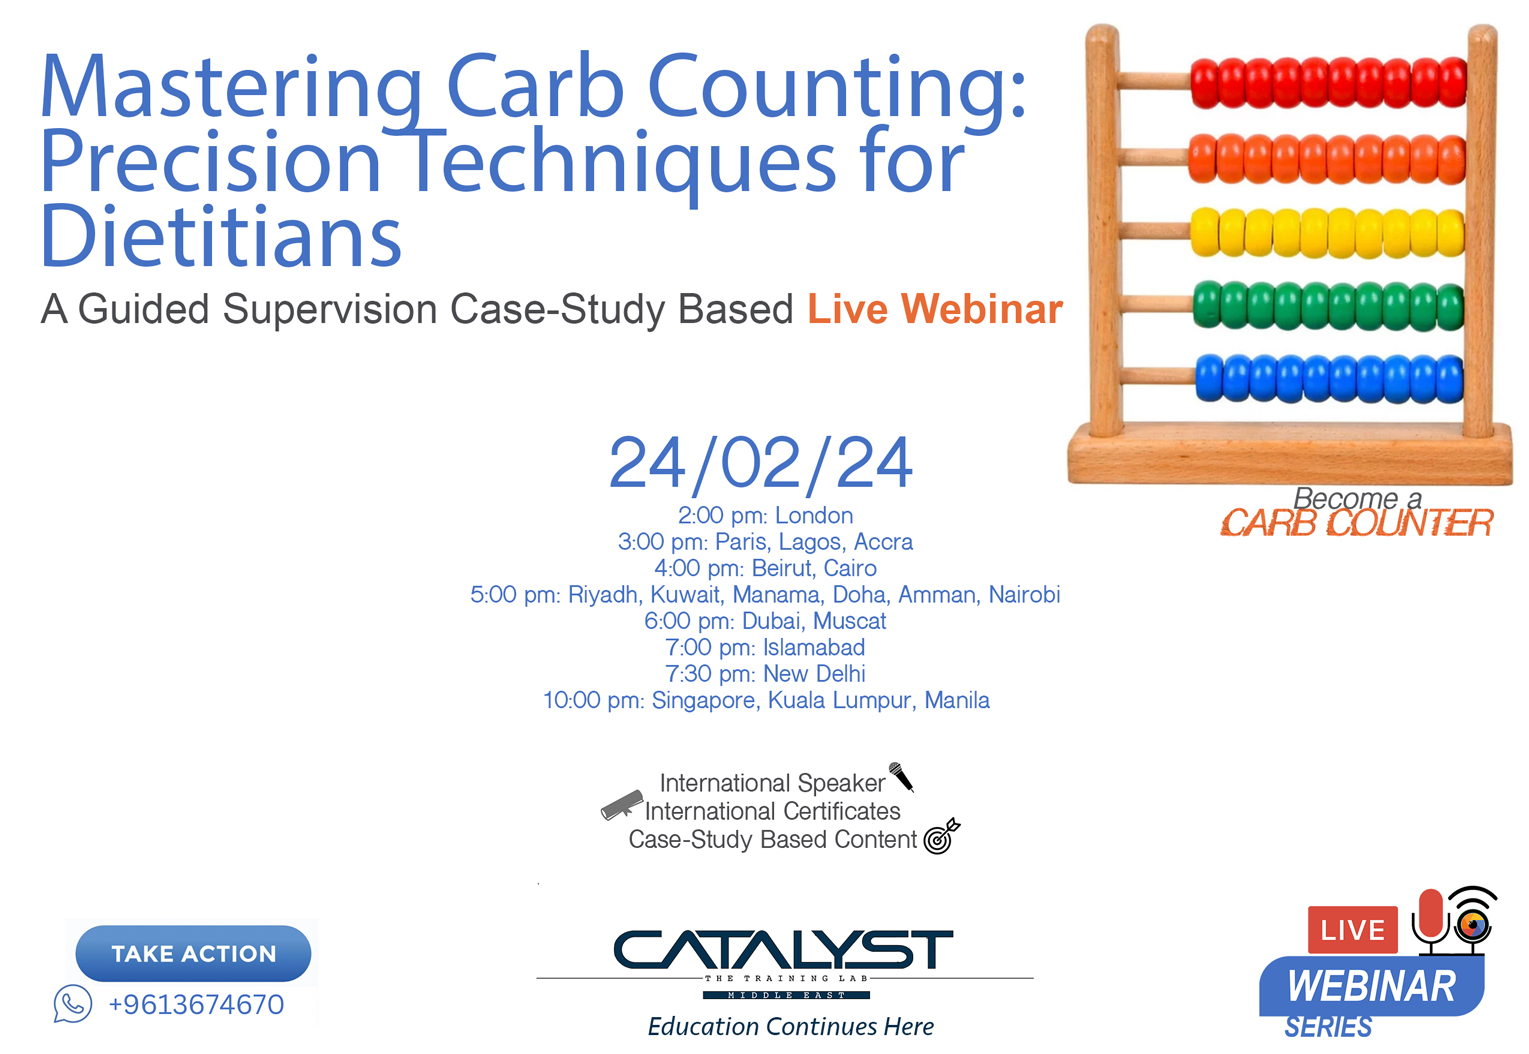 Mastering Carb Counting: Precision techniques for Dietitians 